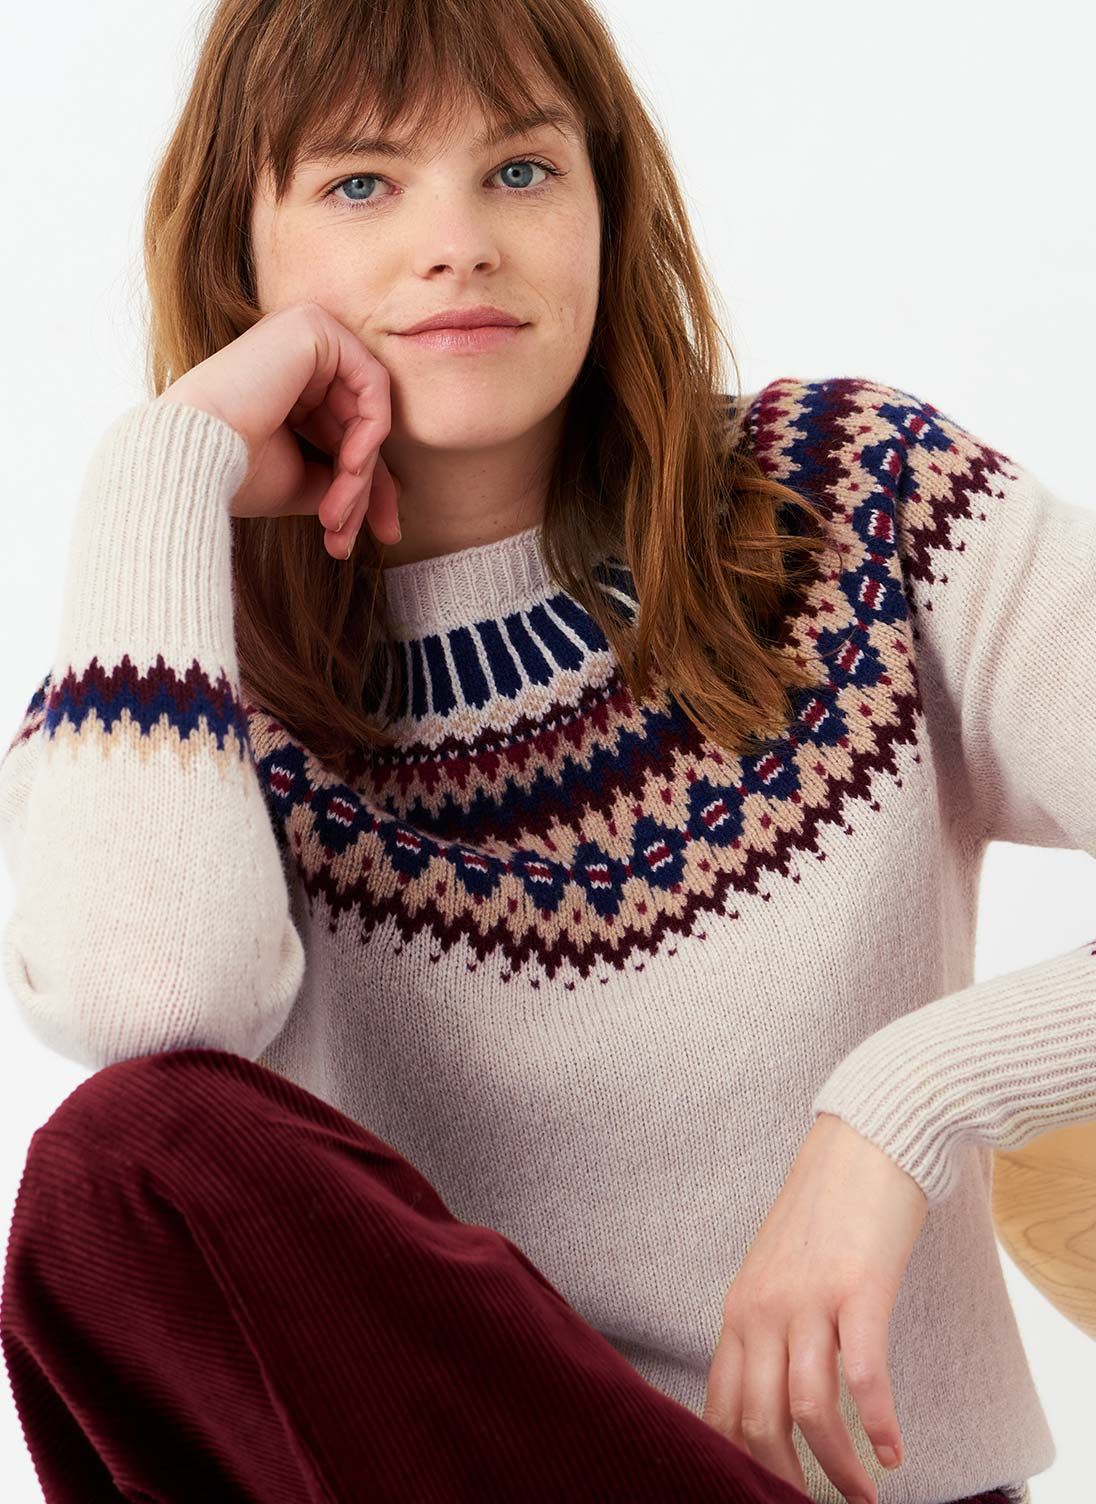 Kate Middleton's Fair Isle sweater by Brora x Troy London